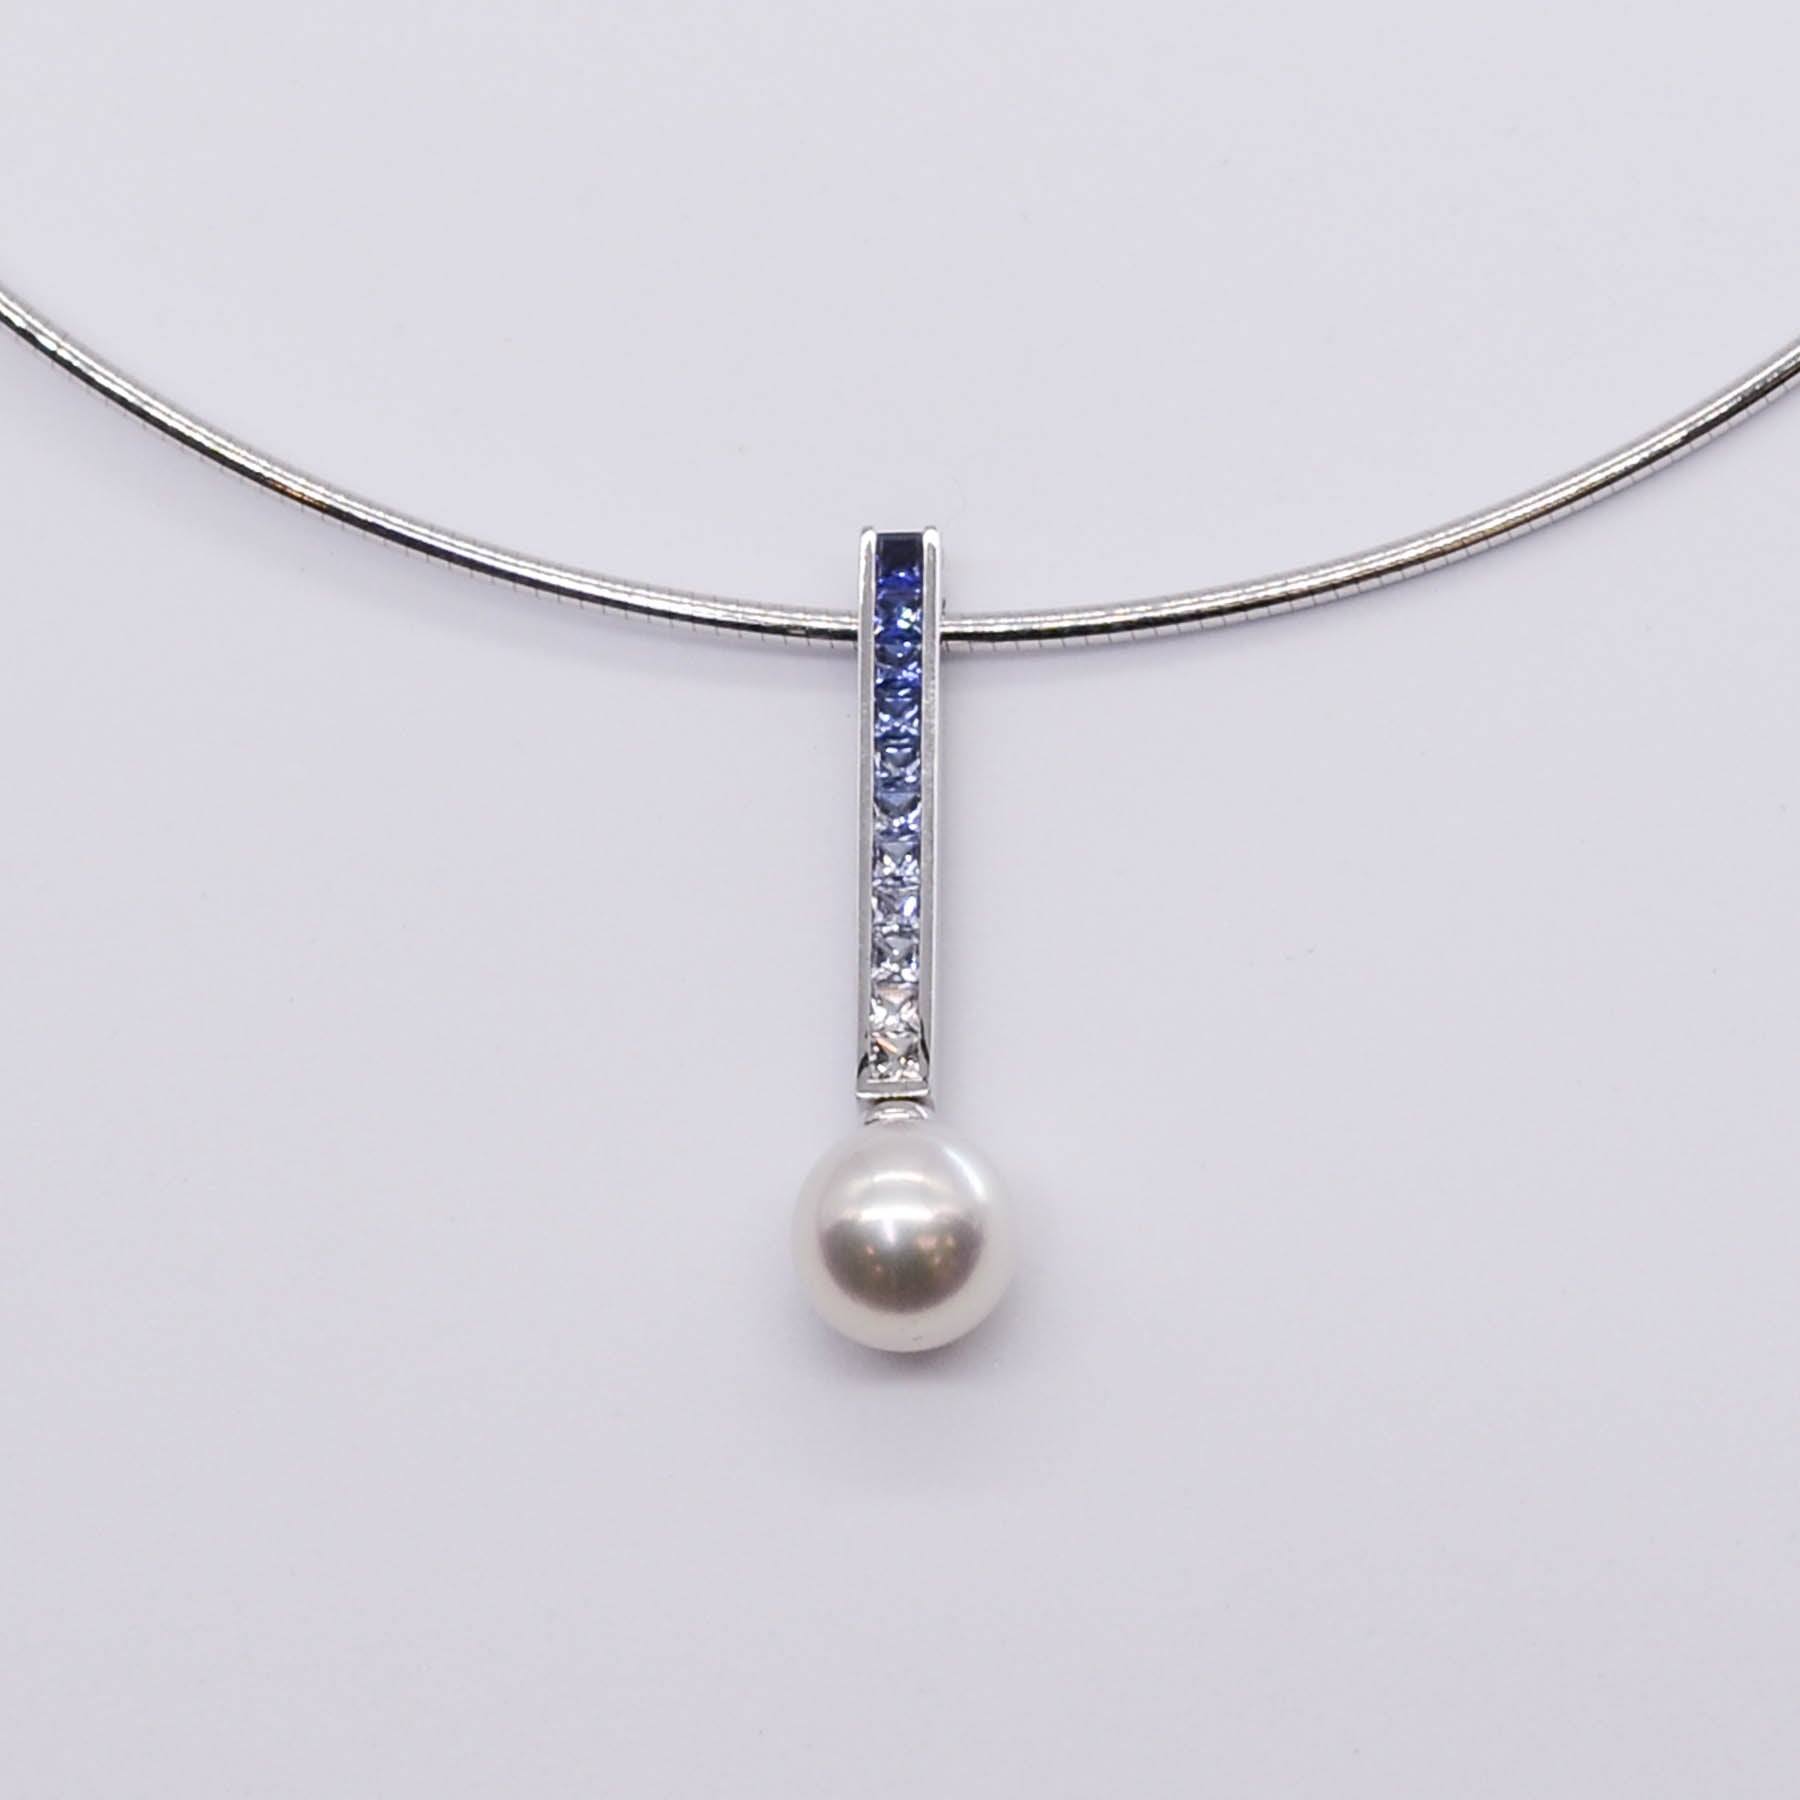 'Mikimoto' Elements of Life Akoya Pearl and Sapphire Ocean Necklace | 8.3mm, 0.85ctw | - 100 Ways